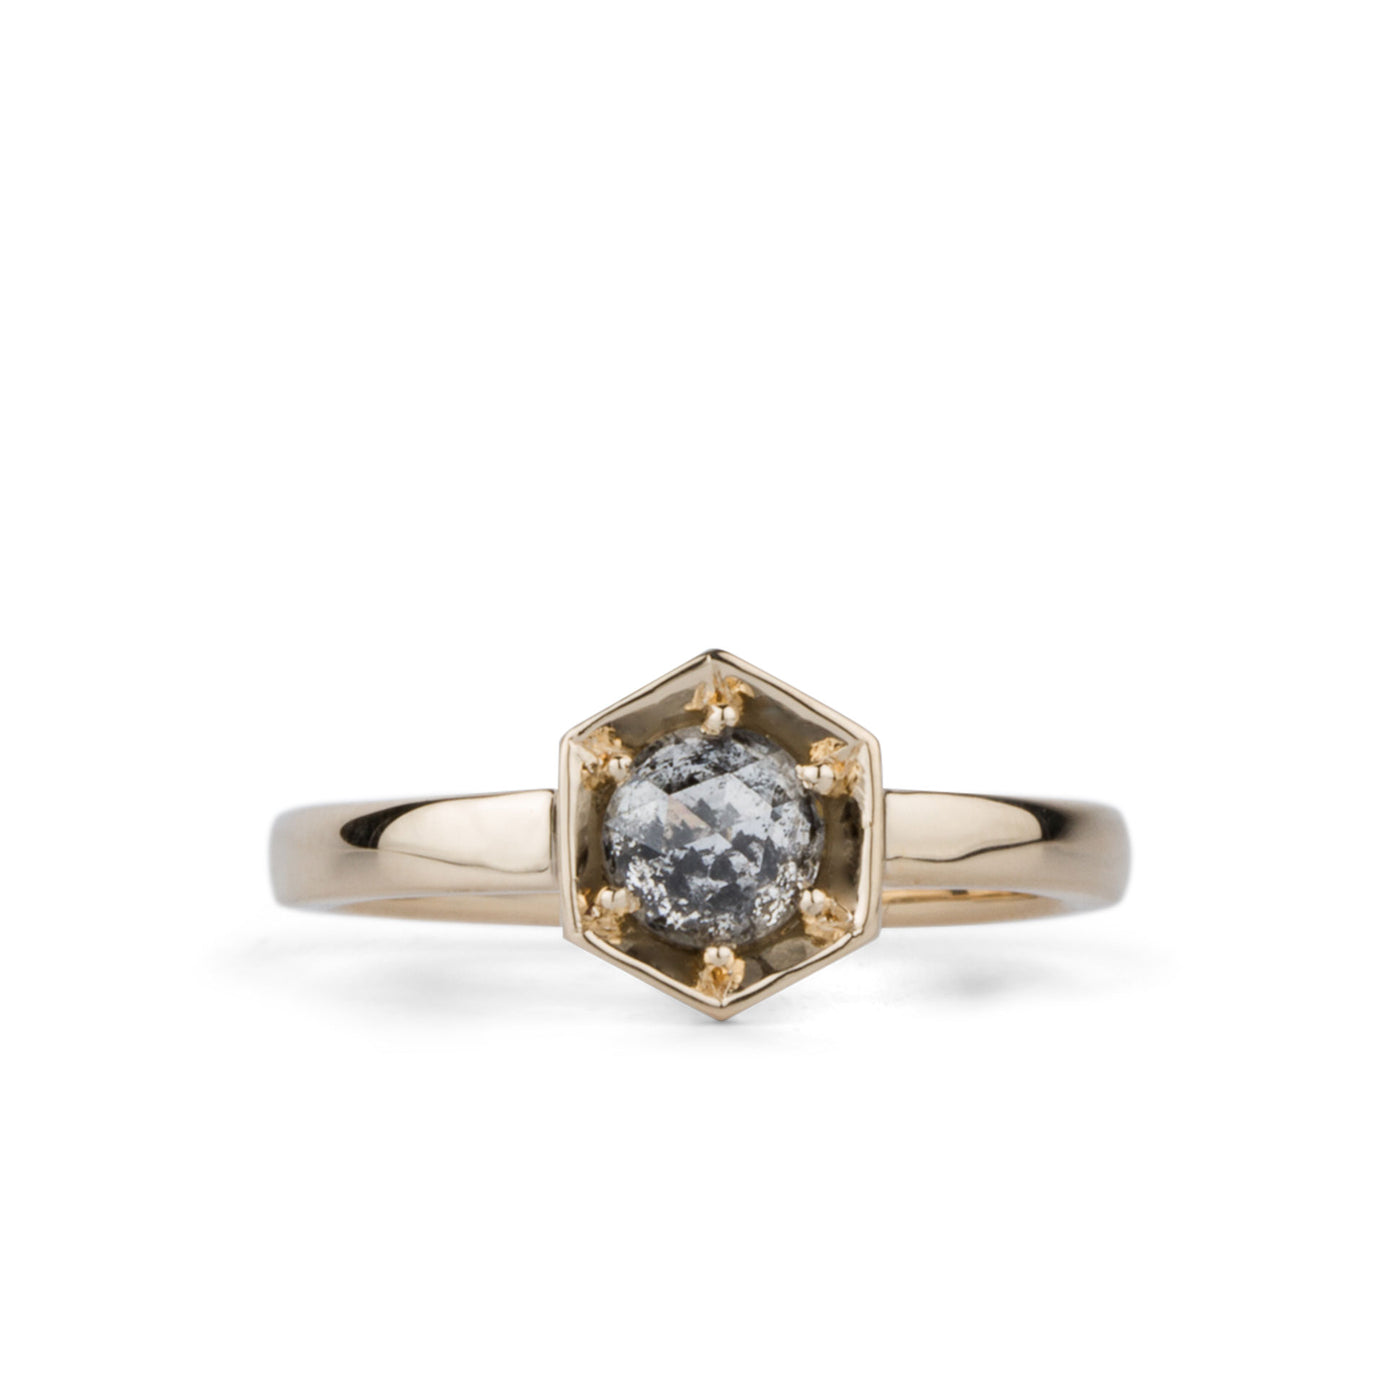 Lofted Issa Ring with Salt and Pepper Rose Cut Diamond by Corey Egan